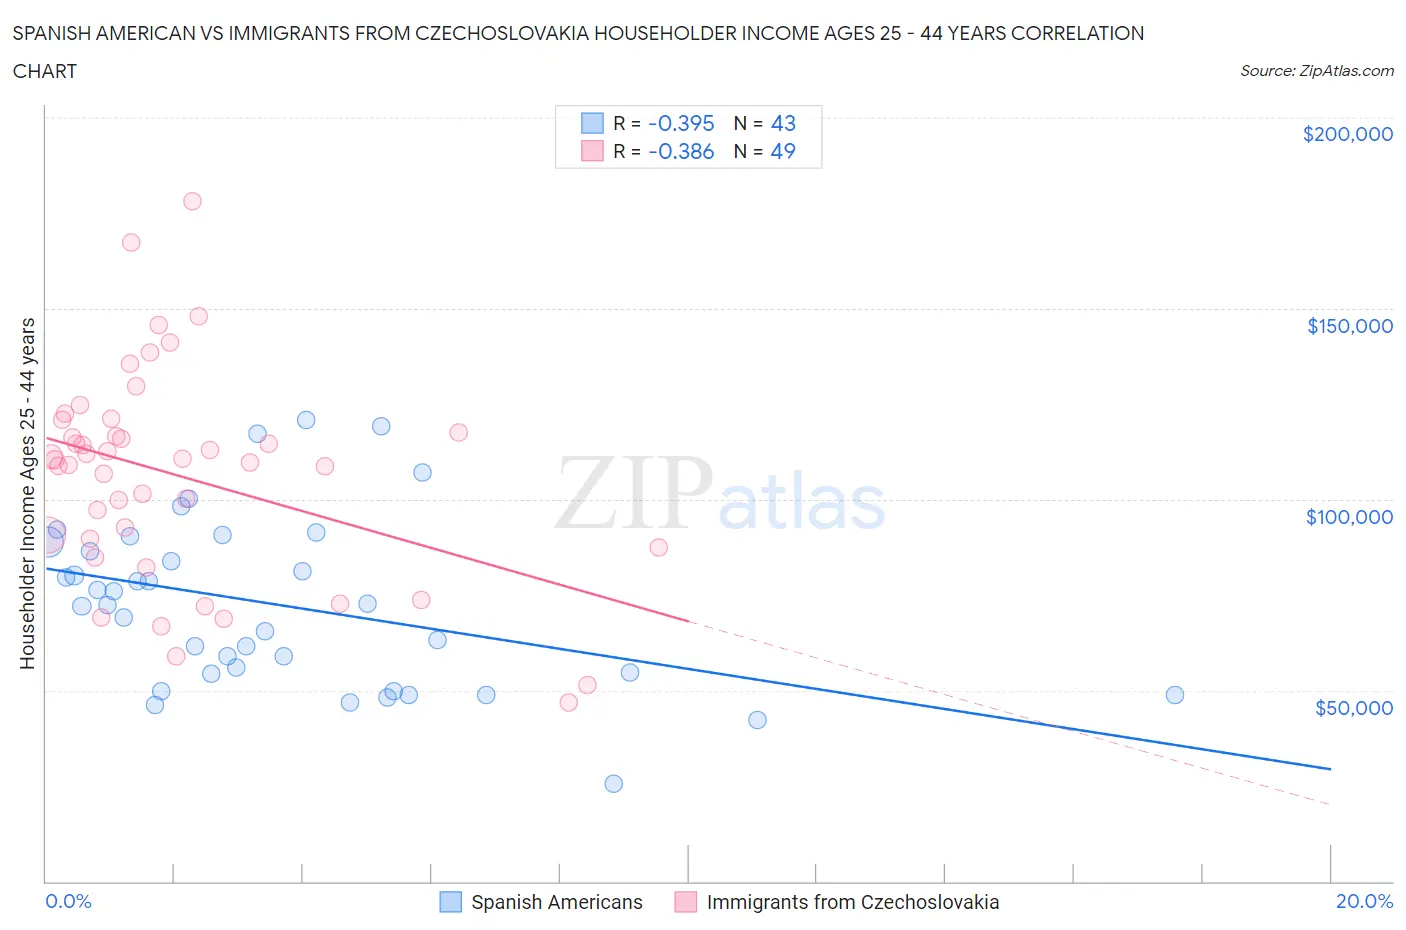 Spanish American vs Immigrants from Czechoslovakia Householder Income Ages 25 - 44 years